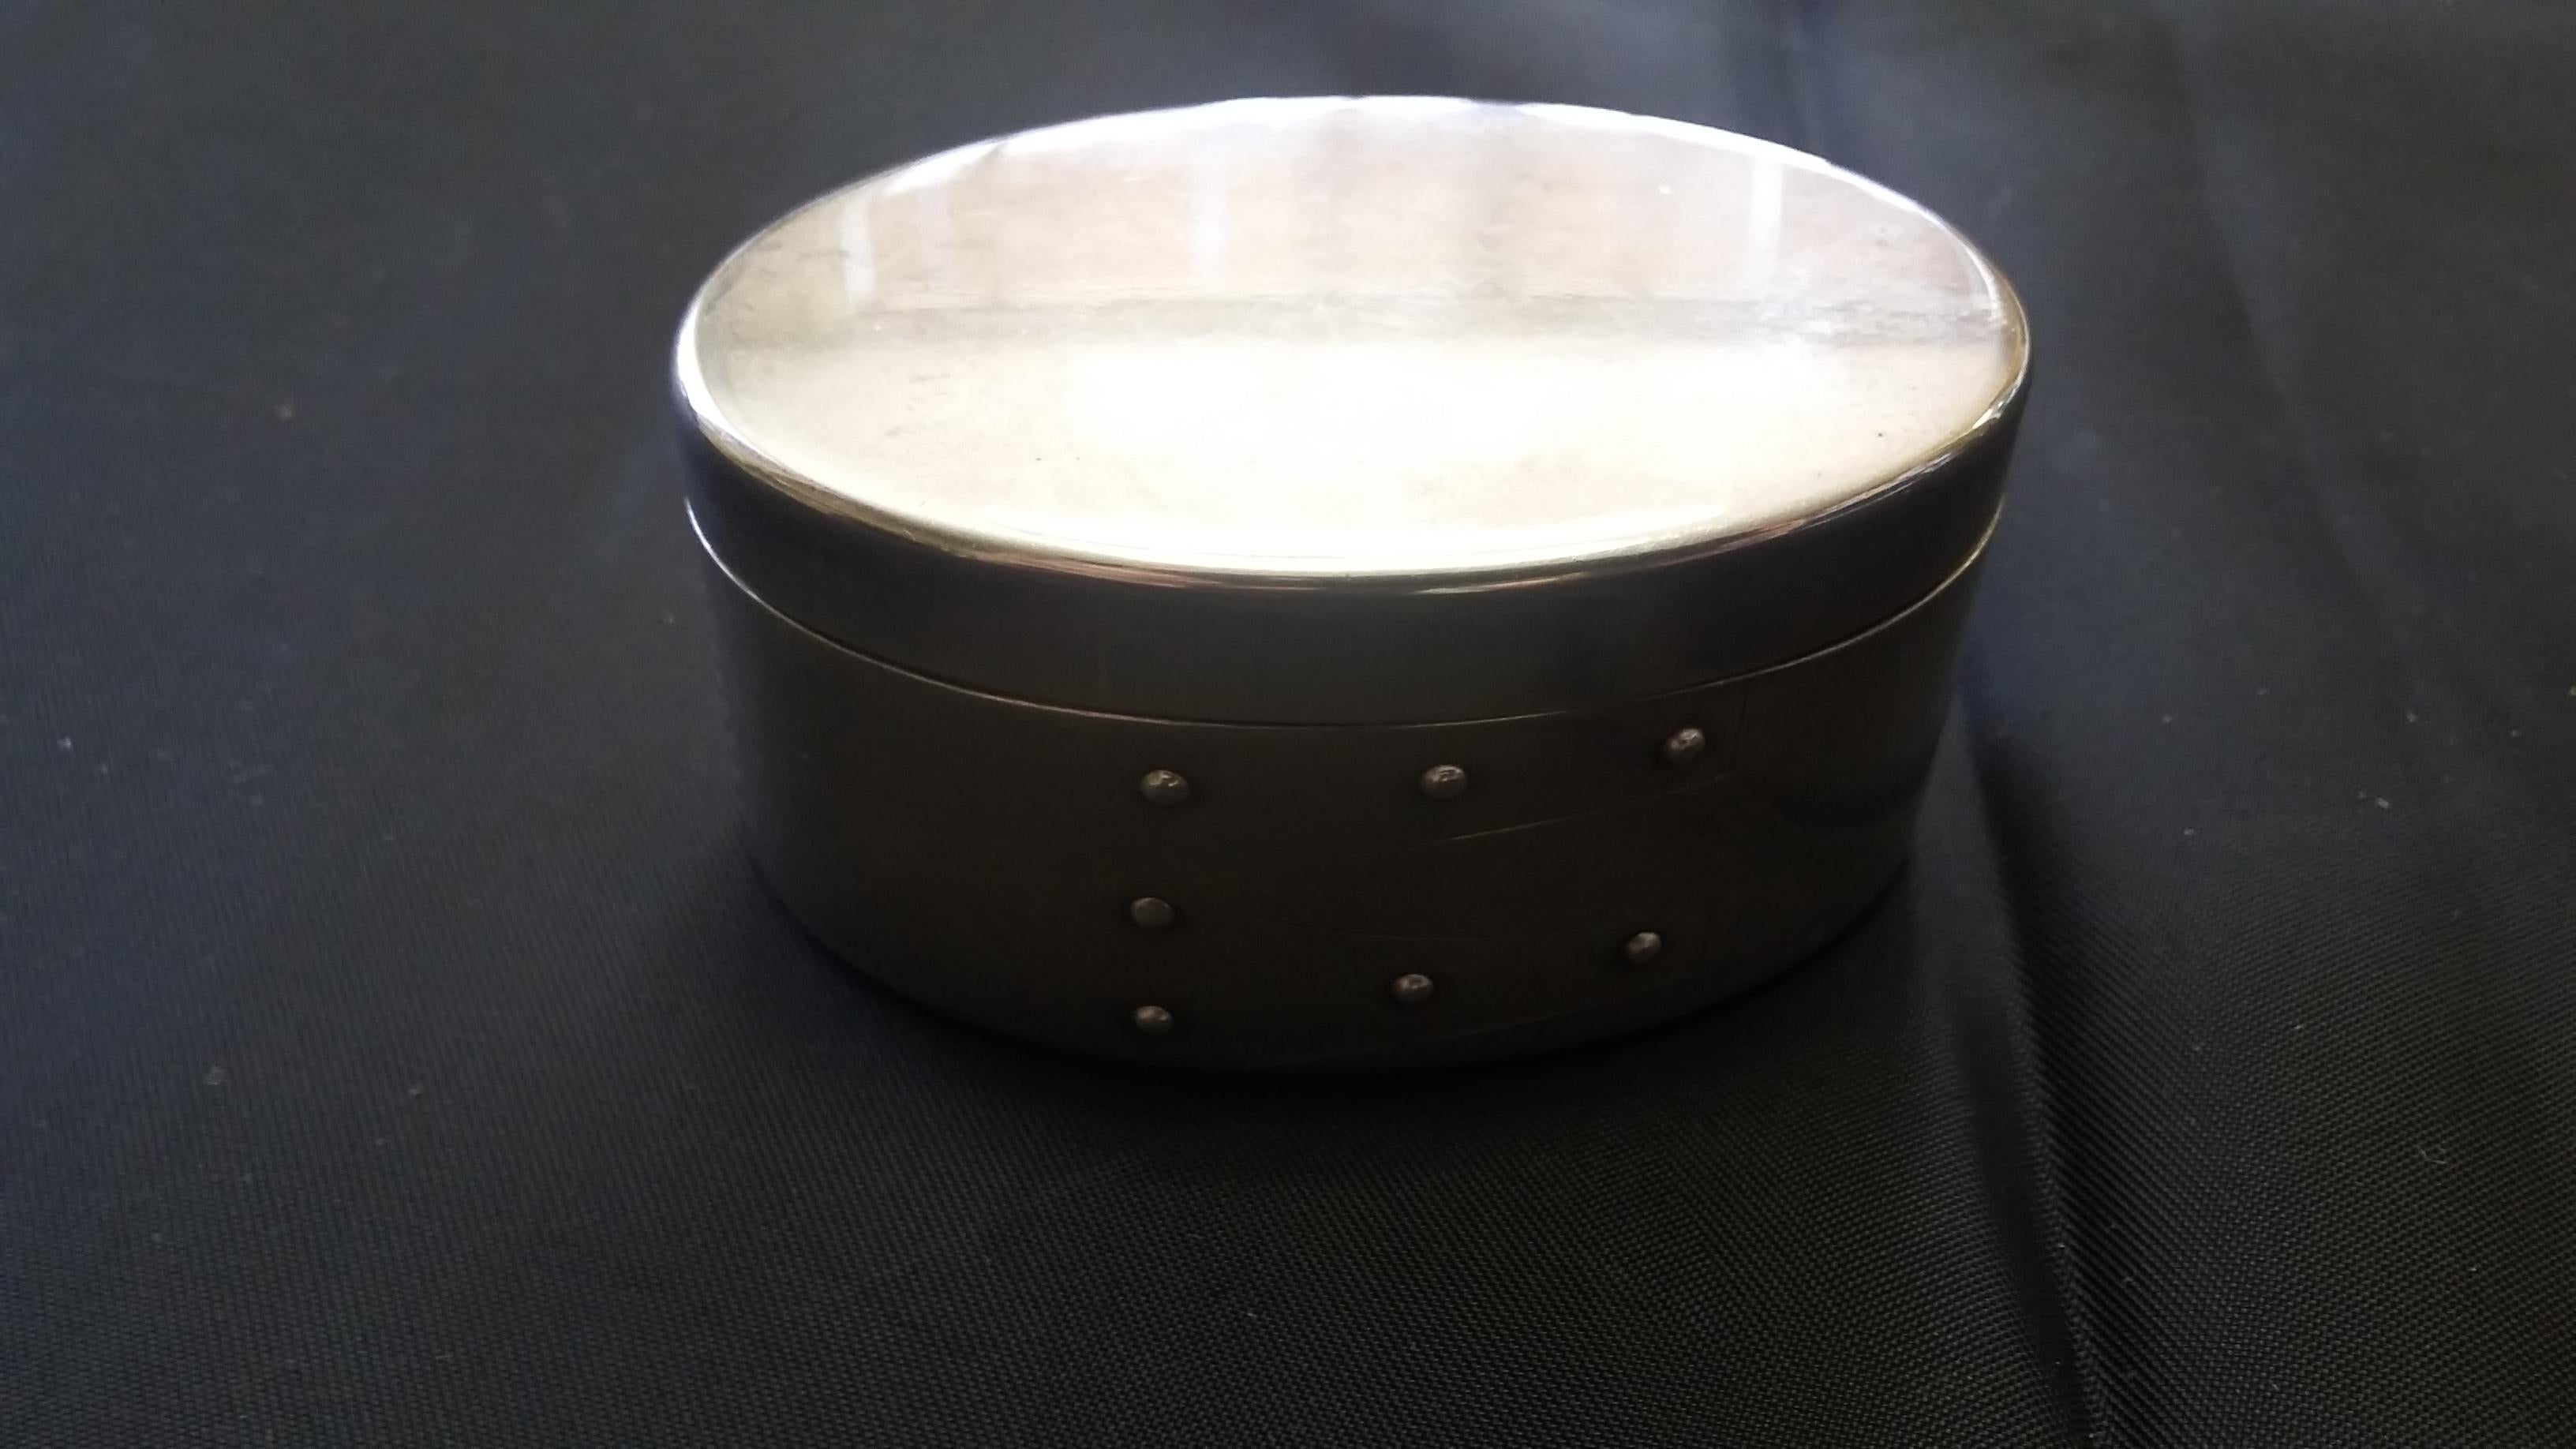 A beautiful small oval sterling silver box. In the style of a shaker box. Signed on the bottom as well as signed Tiffany & Co. on the inside rim of the bottom piece. Has a blue velvet lining. Great little quality item.